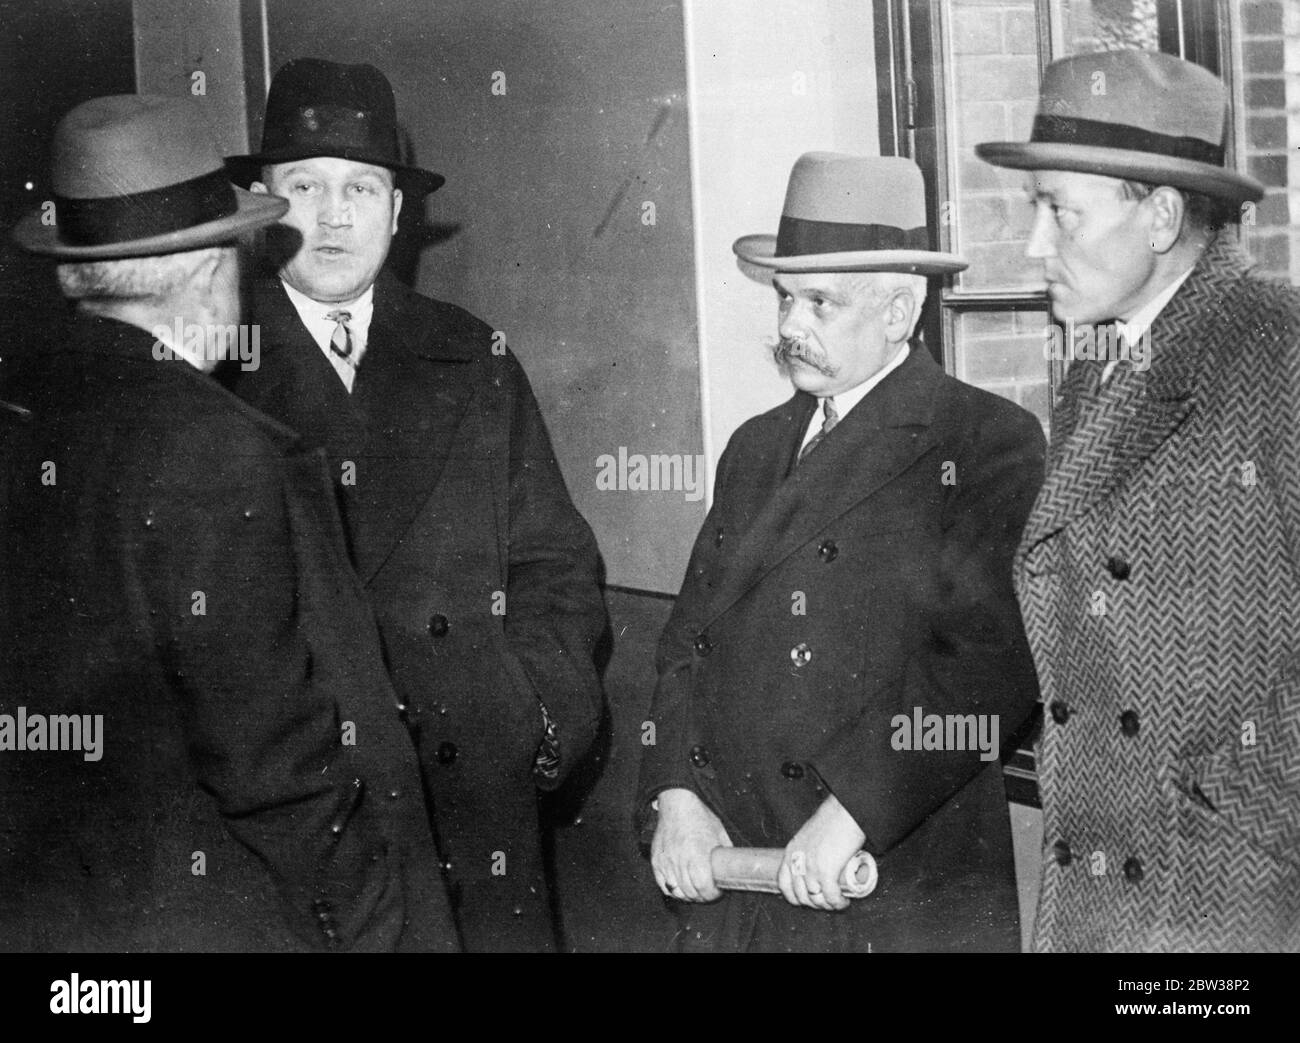 6 officials have been charged in connection with the Lagny railway disaster , France 23 December 1933 . Six officials , including two chief engineers of the Eastern Railway Company , were charged with manslaughter , imprudence and negligent inattention as a result of the judicial inquiry into the causes of the railway disaster at Lagny in which over 200 passengers were killed and 300 injured . The accused are M Merlin , Chief operating engineer of the Central Division , M Montignault foreman at the train assembly depot of Lavillette , M Mougeot a controller at the depot , M Pietremont , his as Stock Photo